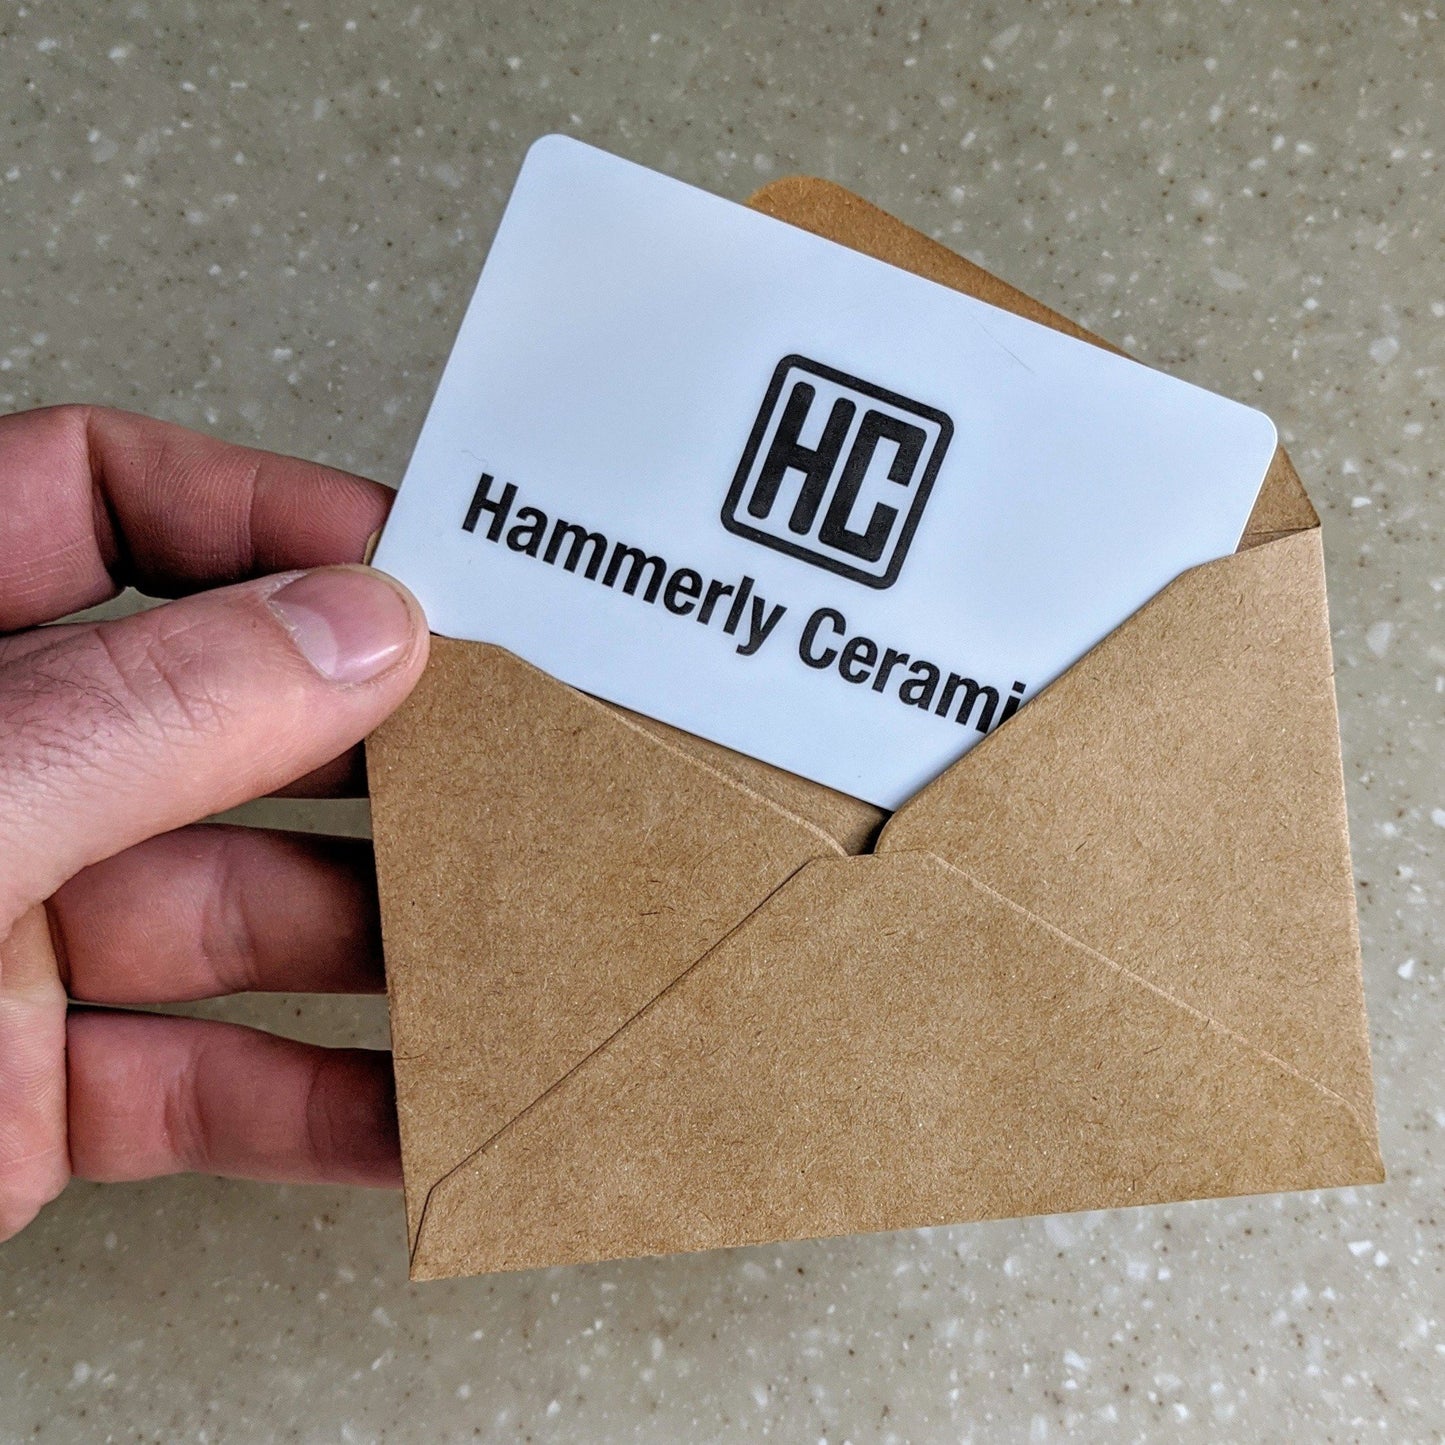 Physical Hammerly Ceramics Gift Card